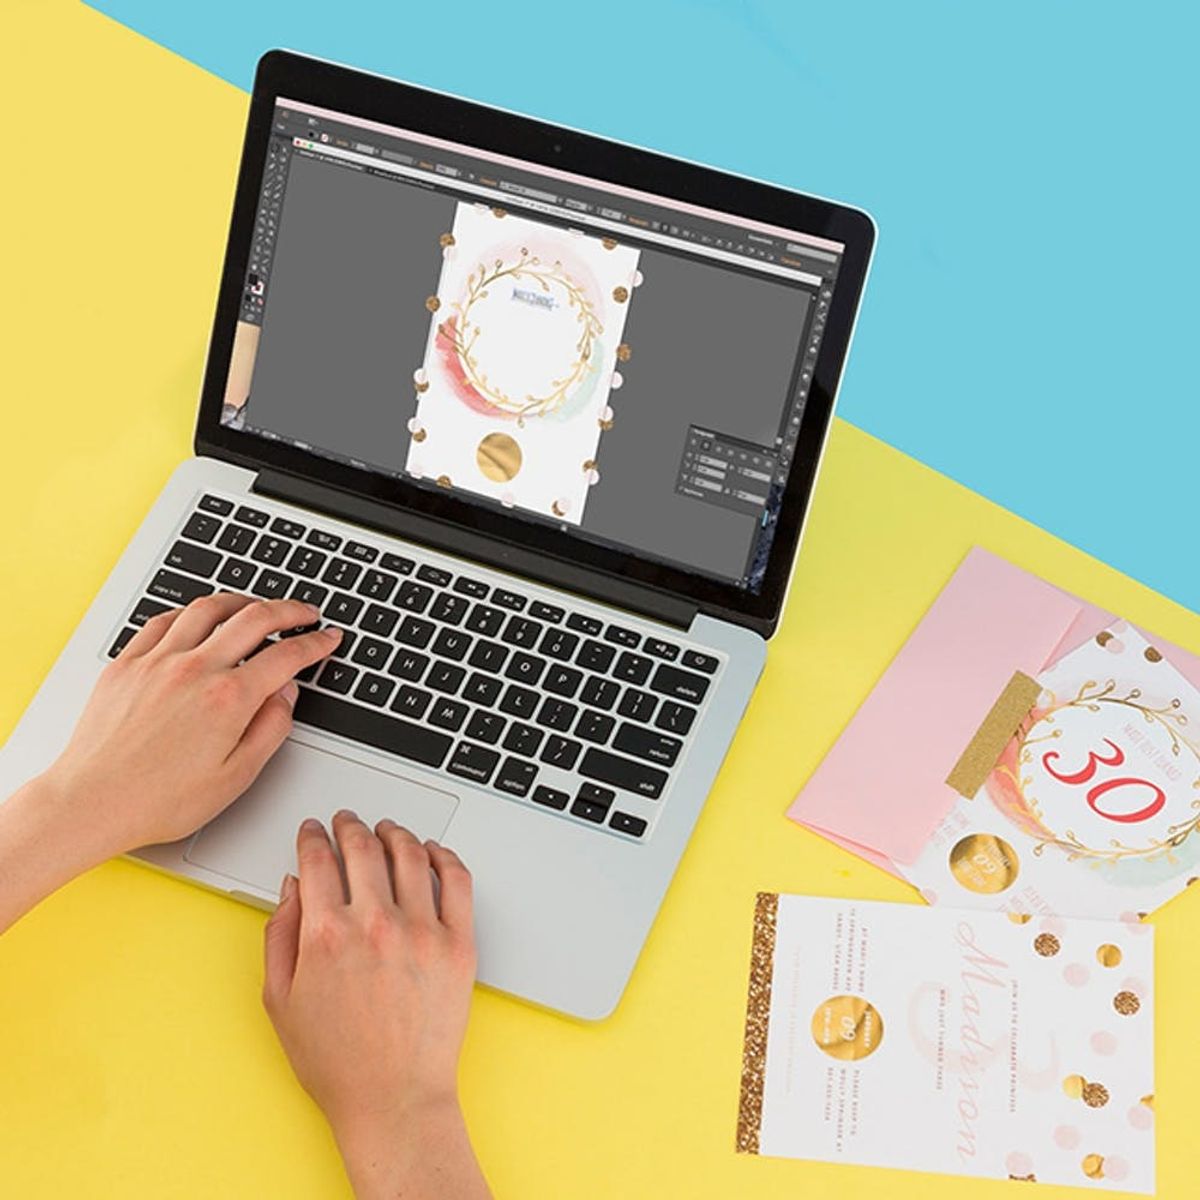 Gift Guide Alert! Your Aspiring Graphic Designer Friend Will Love These Online Classes